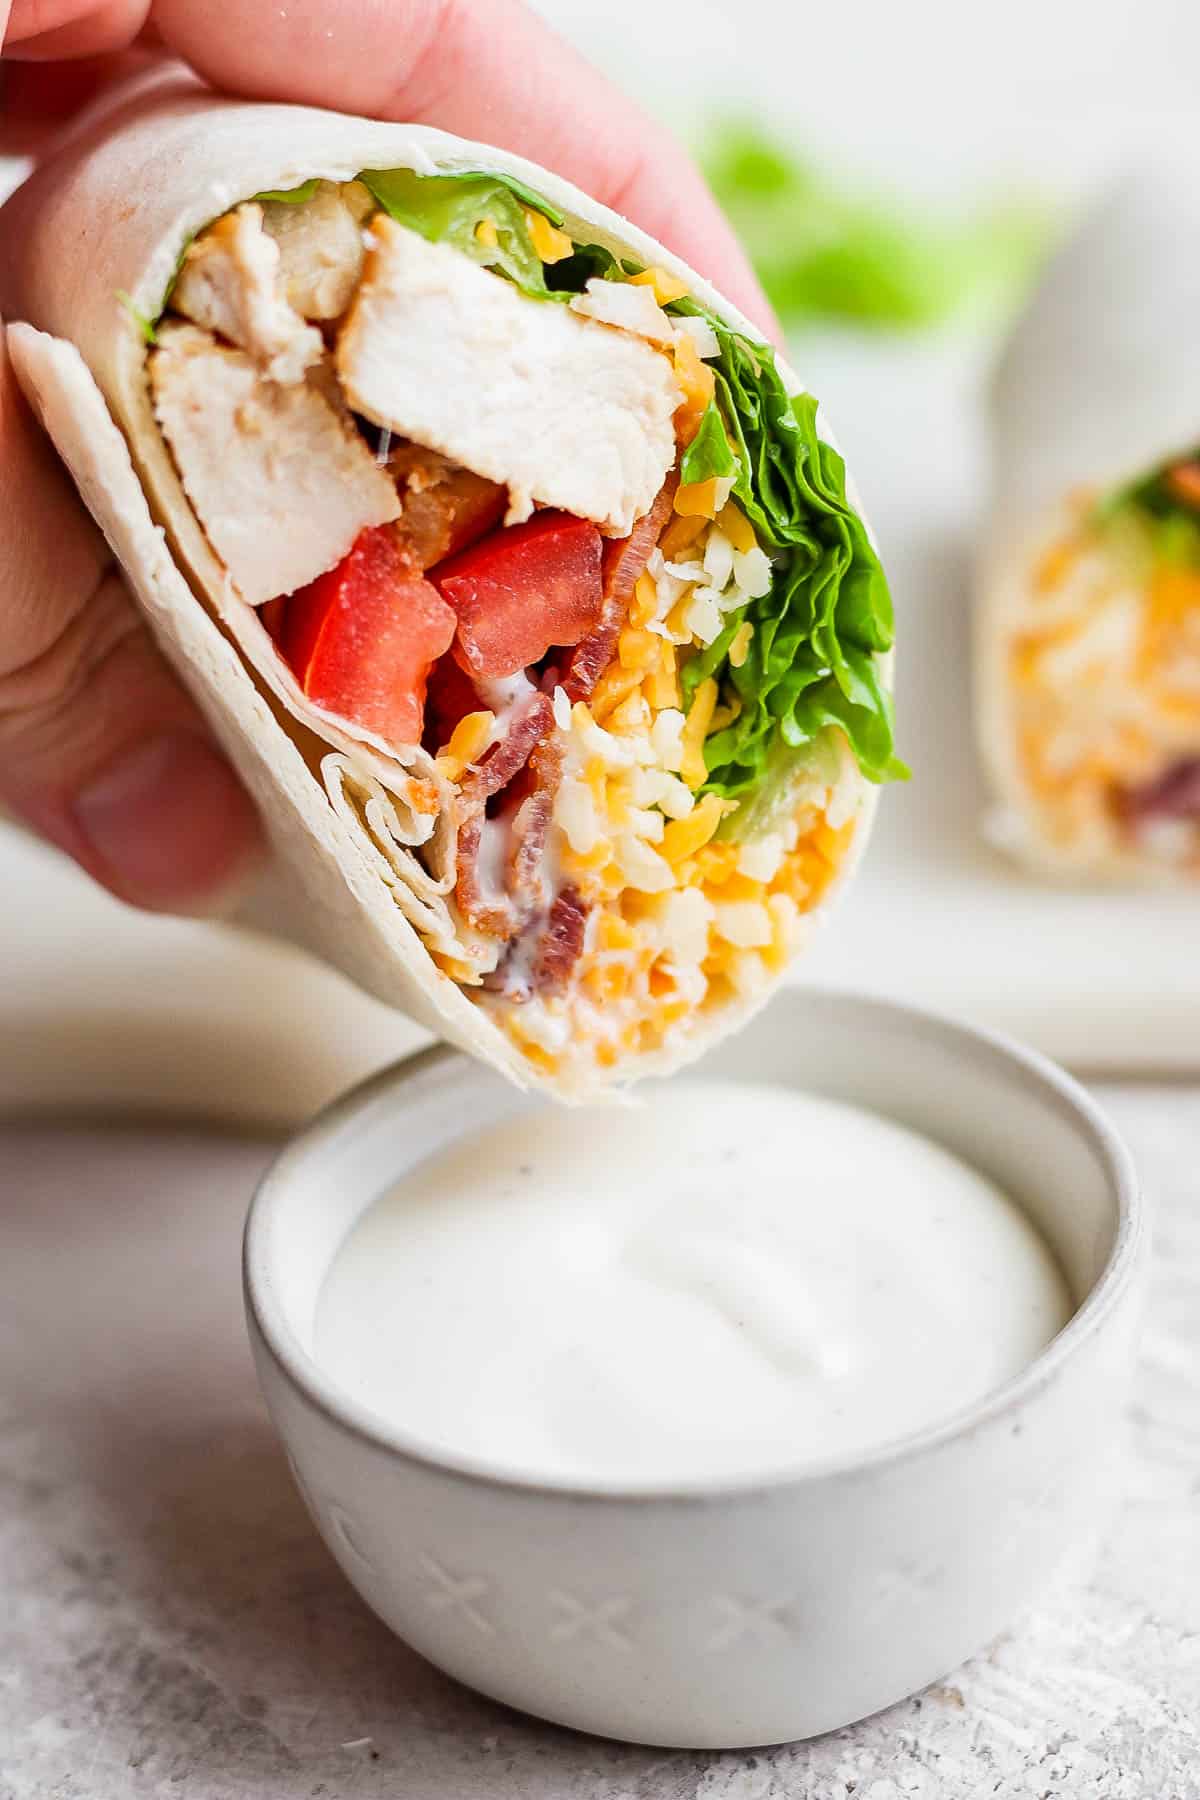 Half of a wrap being dipped in ranch.